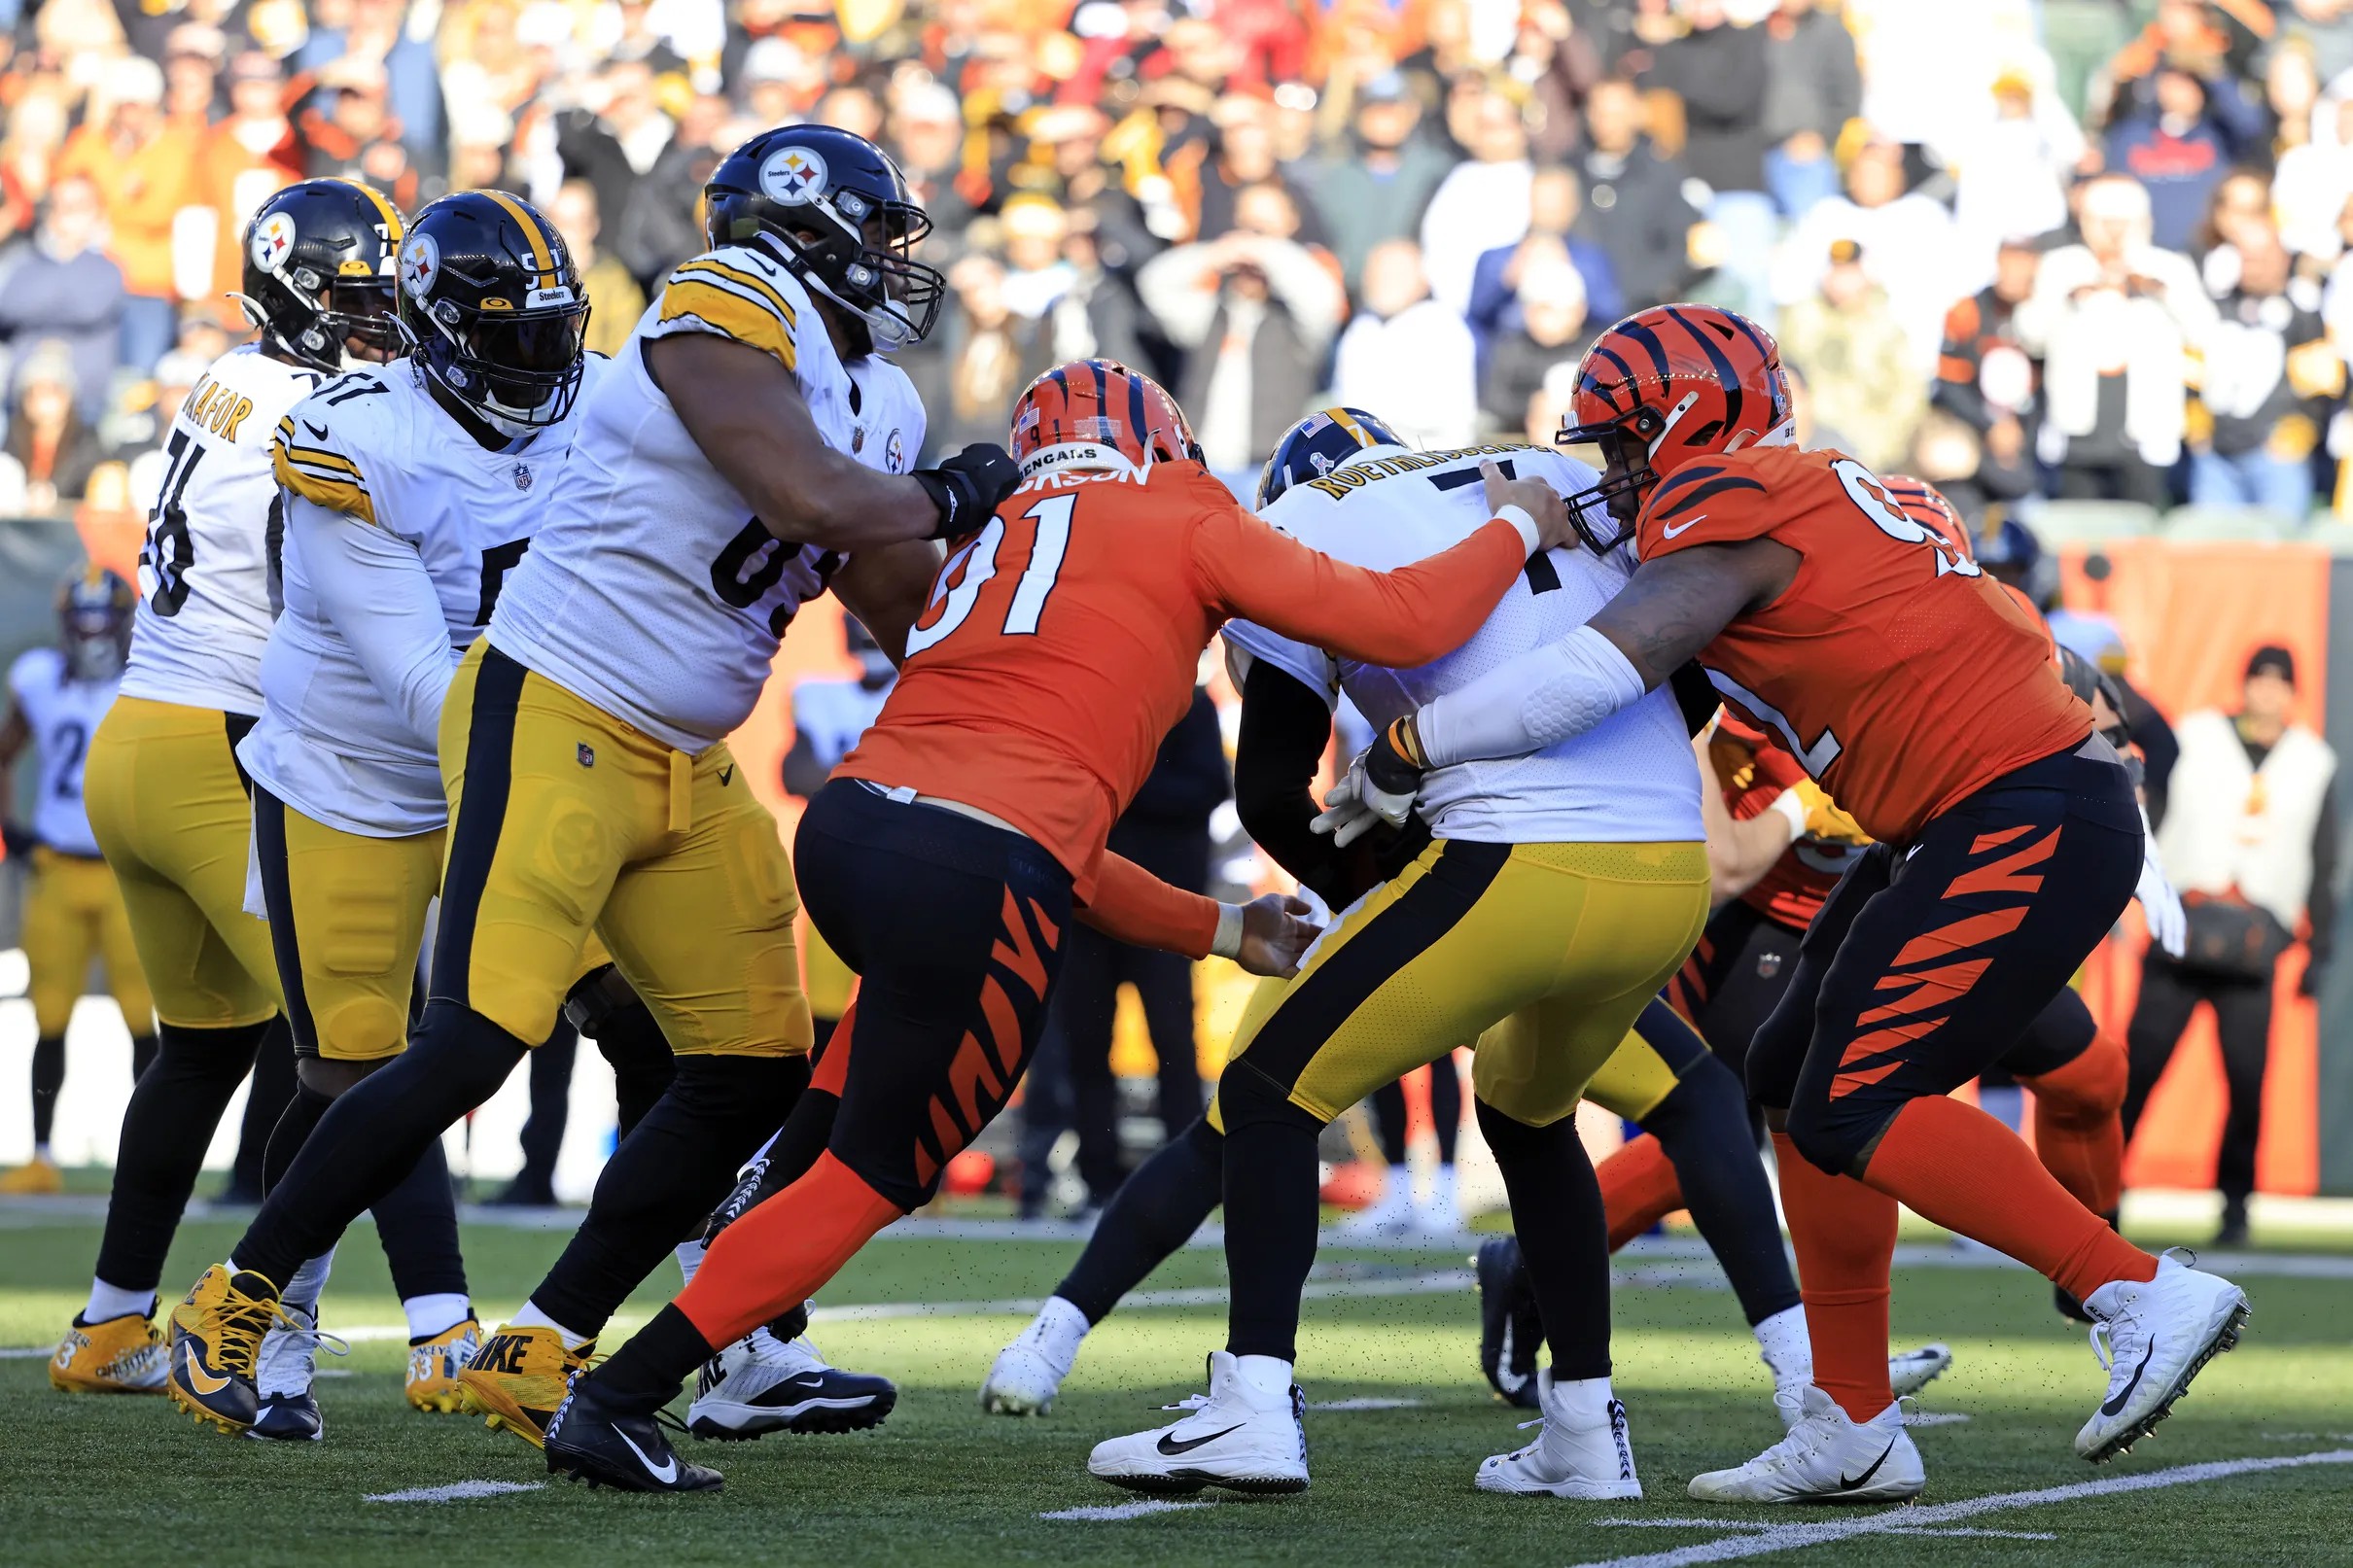 Analyzing the Steelers Week 12 loss to the Bengals, by the numbers